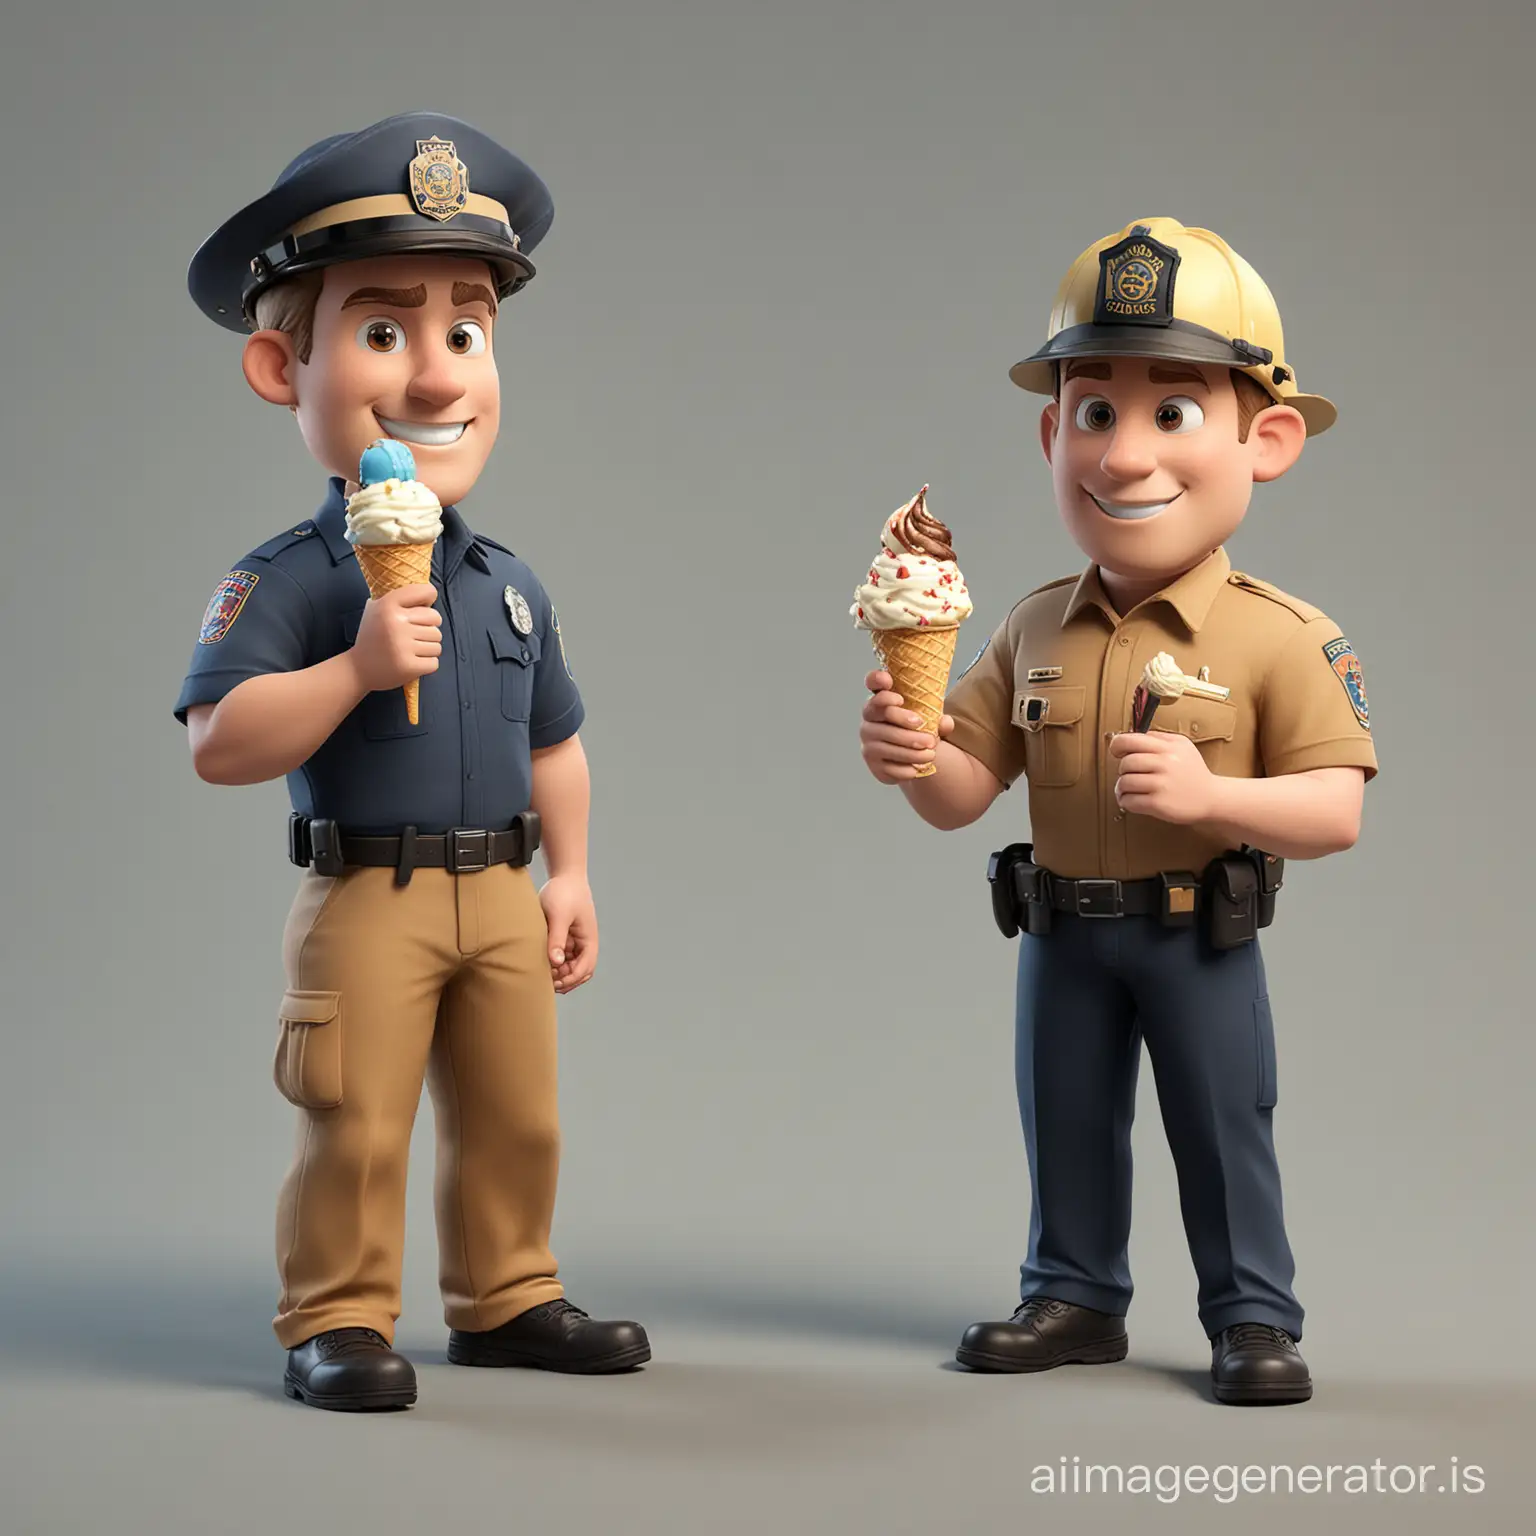 create a cartoon image.  a firefighter man wearing a tan/light brown uniform and a black firefighter helmet.  The other person is a policeman wearing a blue uniform, blue regular police hat (not a helmet).  they are both holding / eating an ice cream cone.